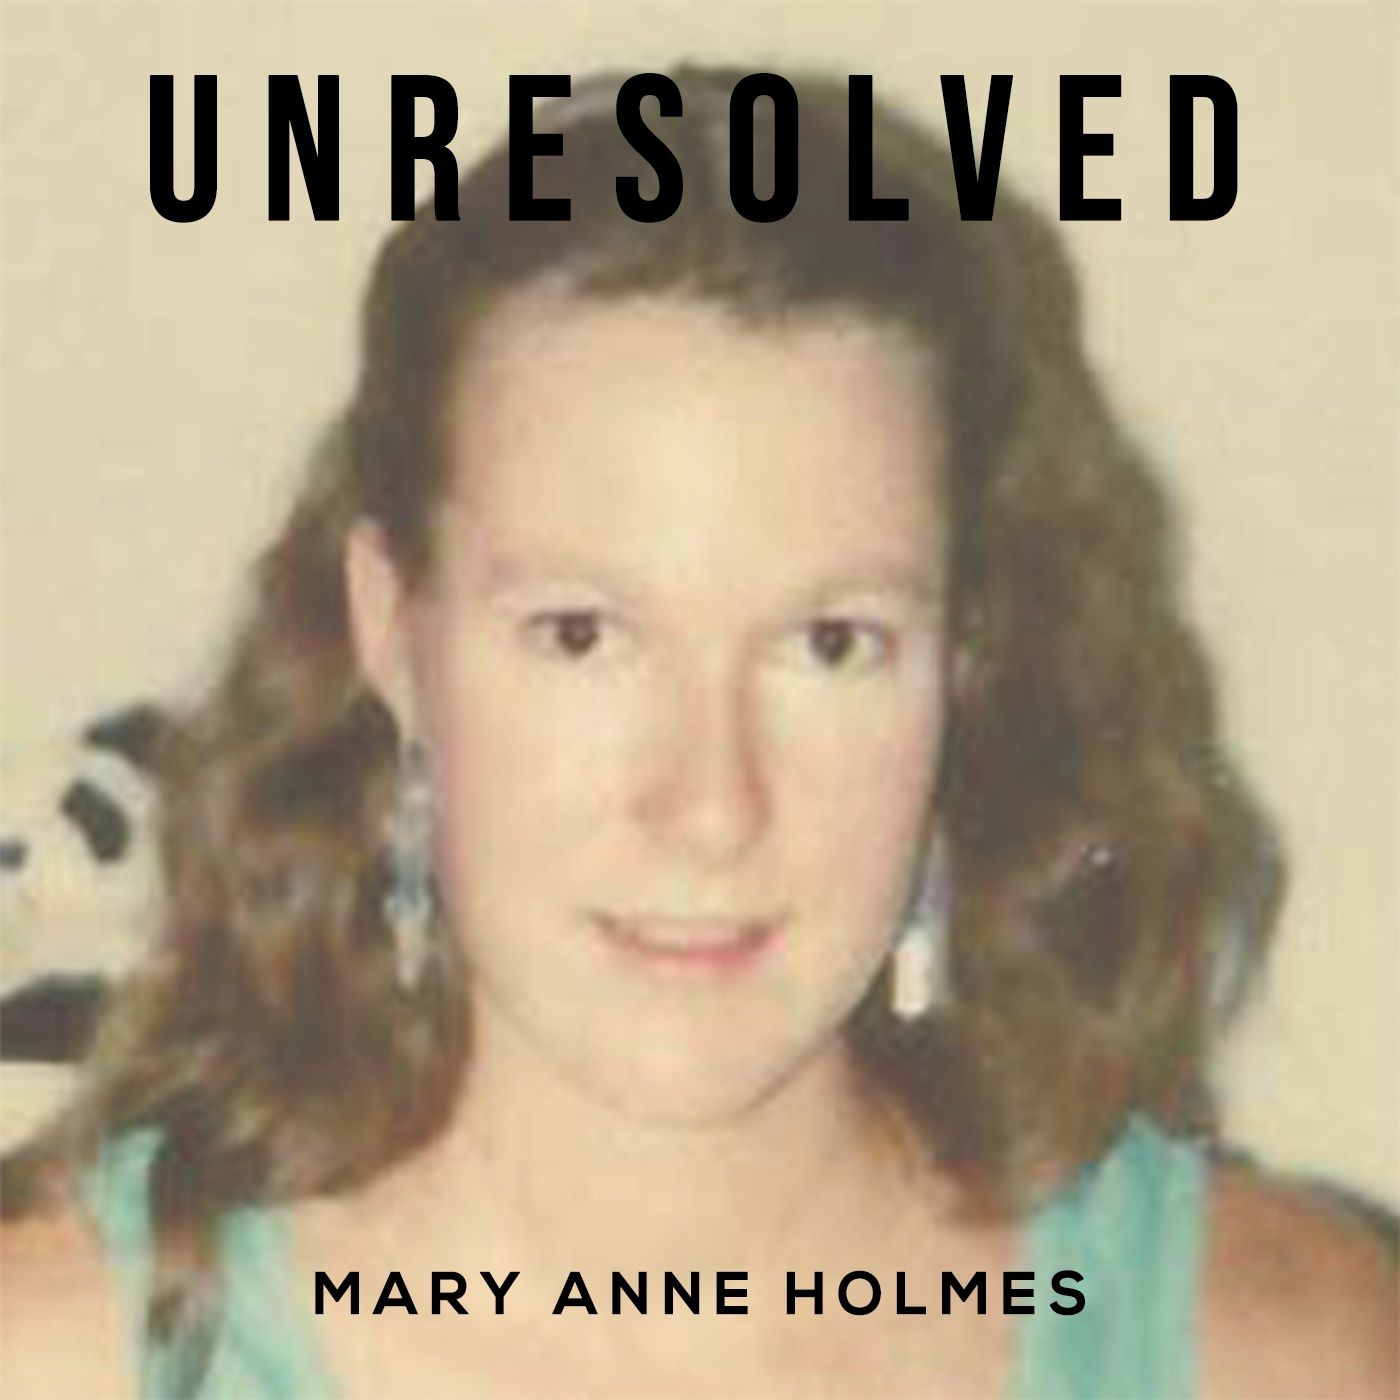 Mary Anne Holmes